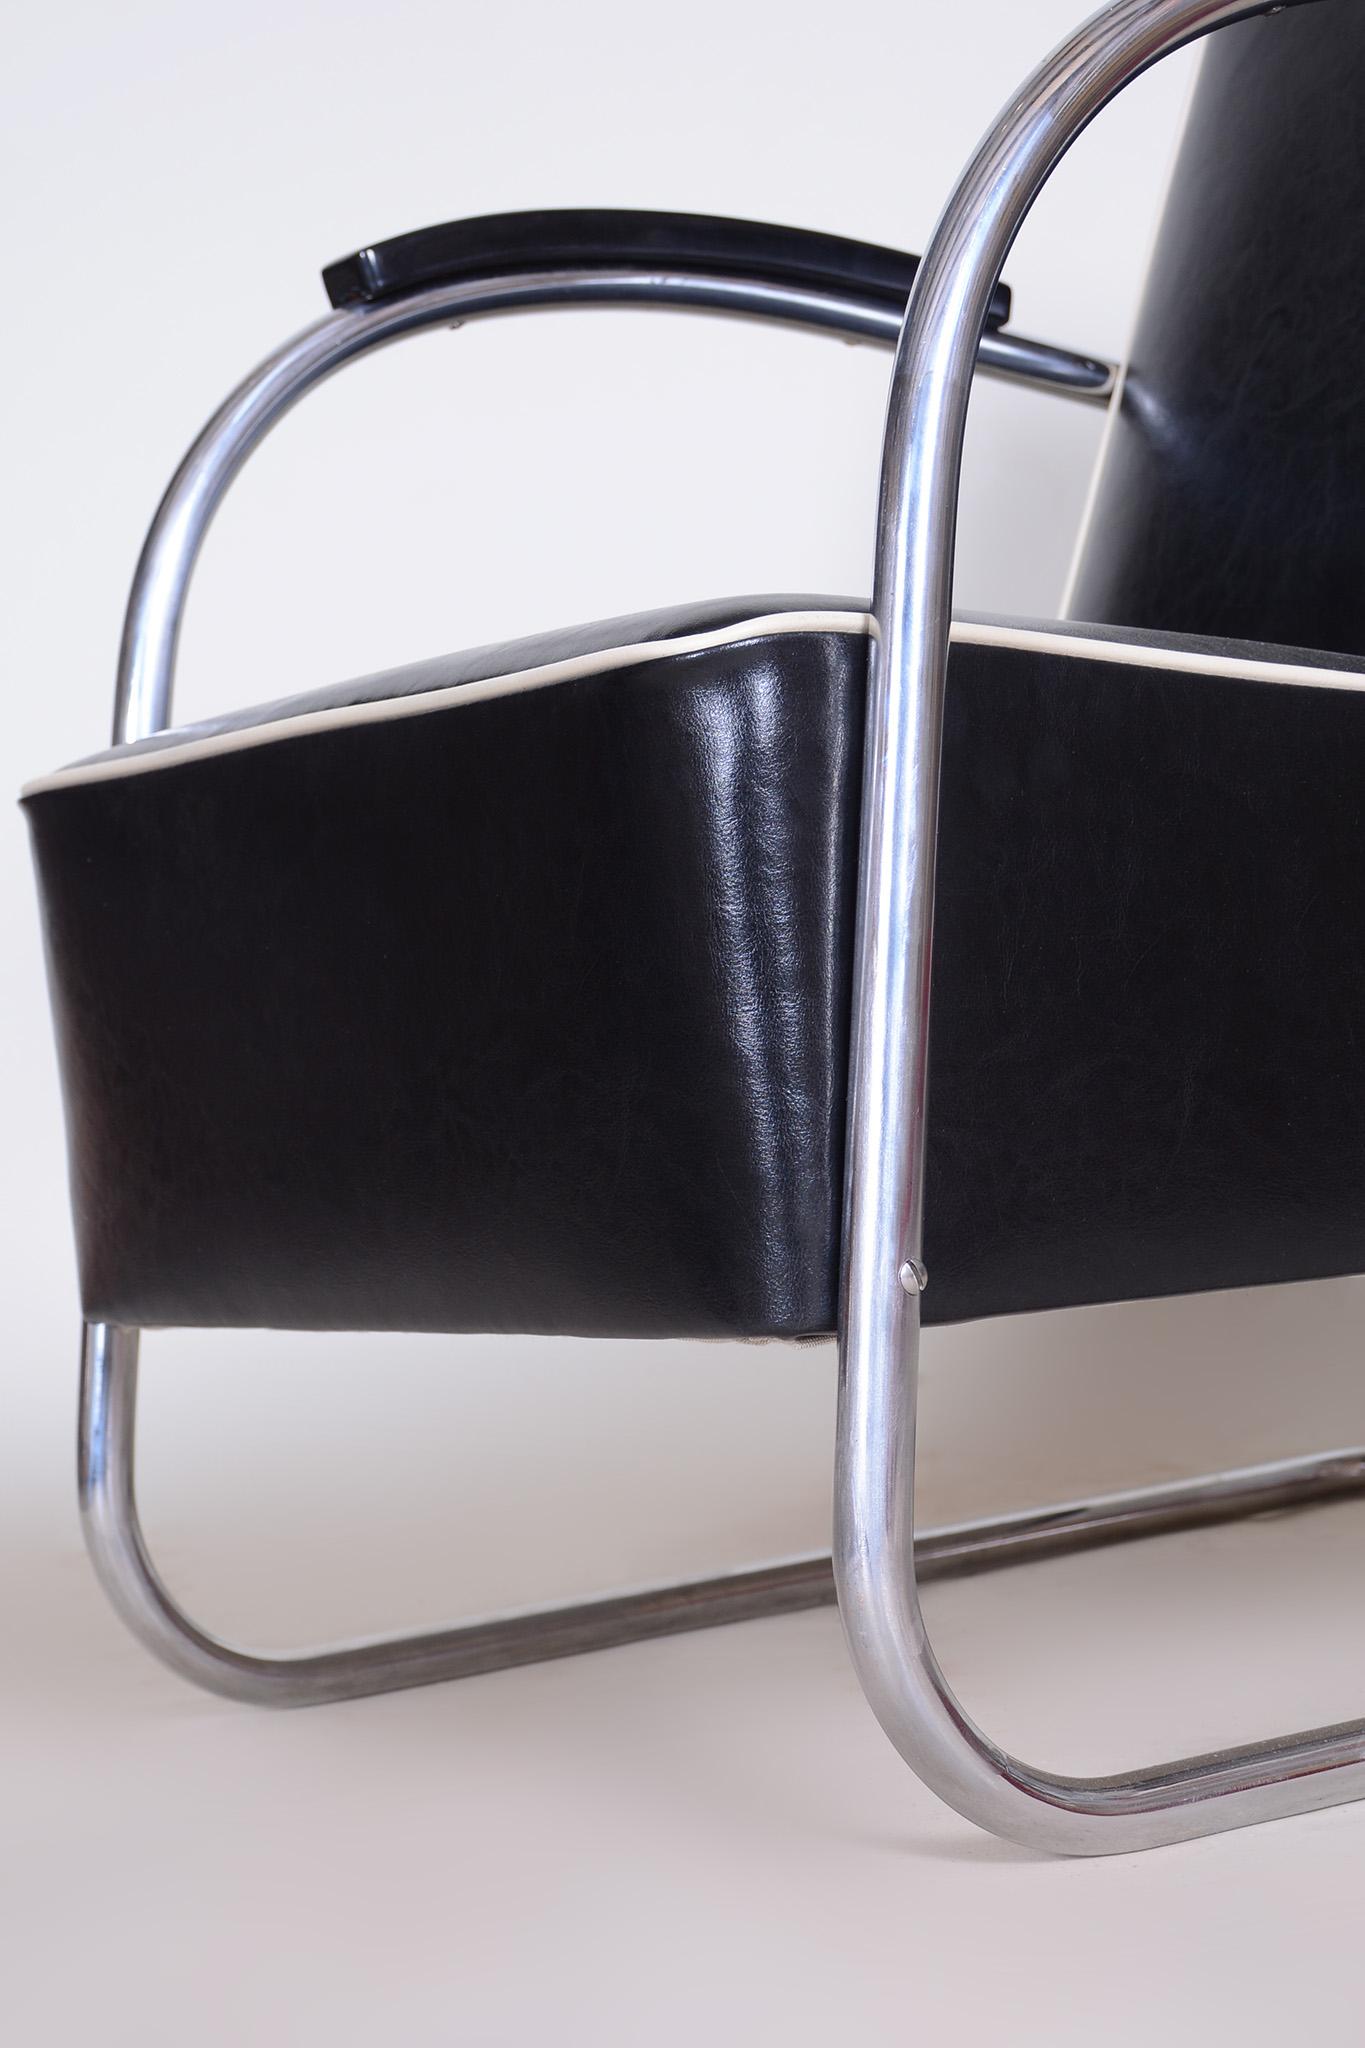 Pair of Black Bauhaus Armchairs, Made by Mucke Melder in 1930s Czechia For Sale 1